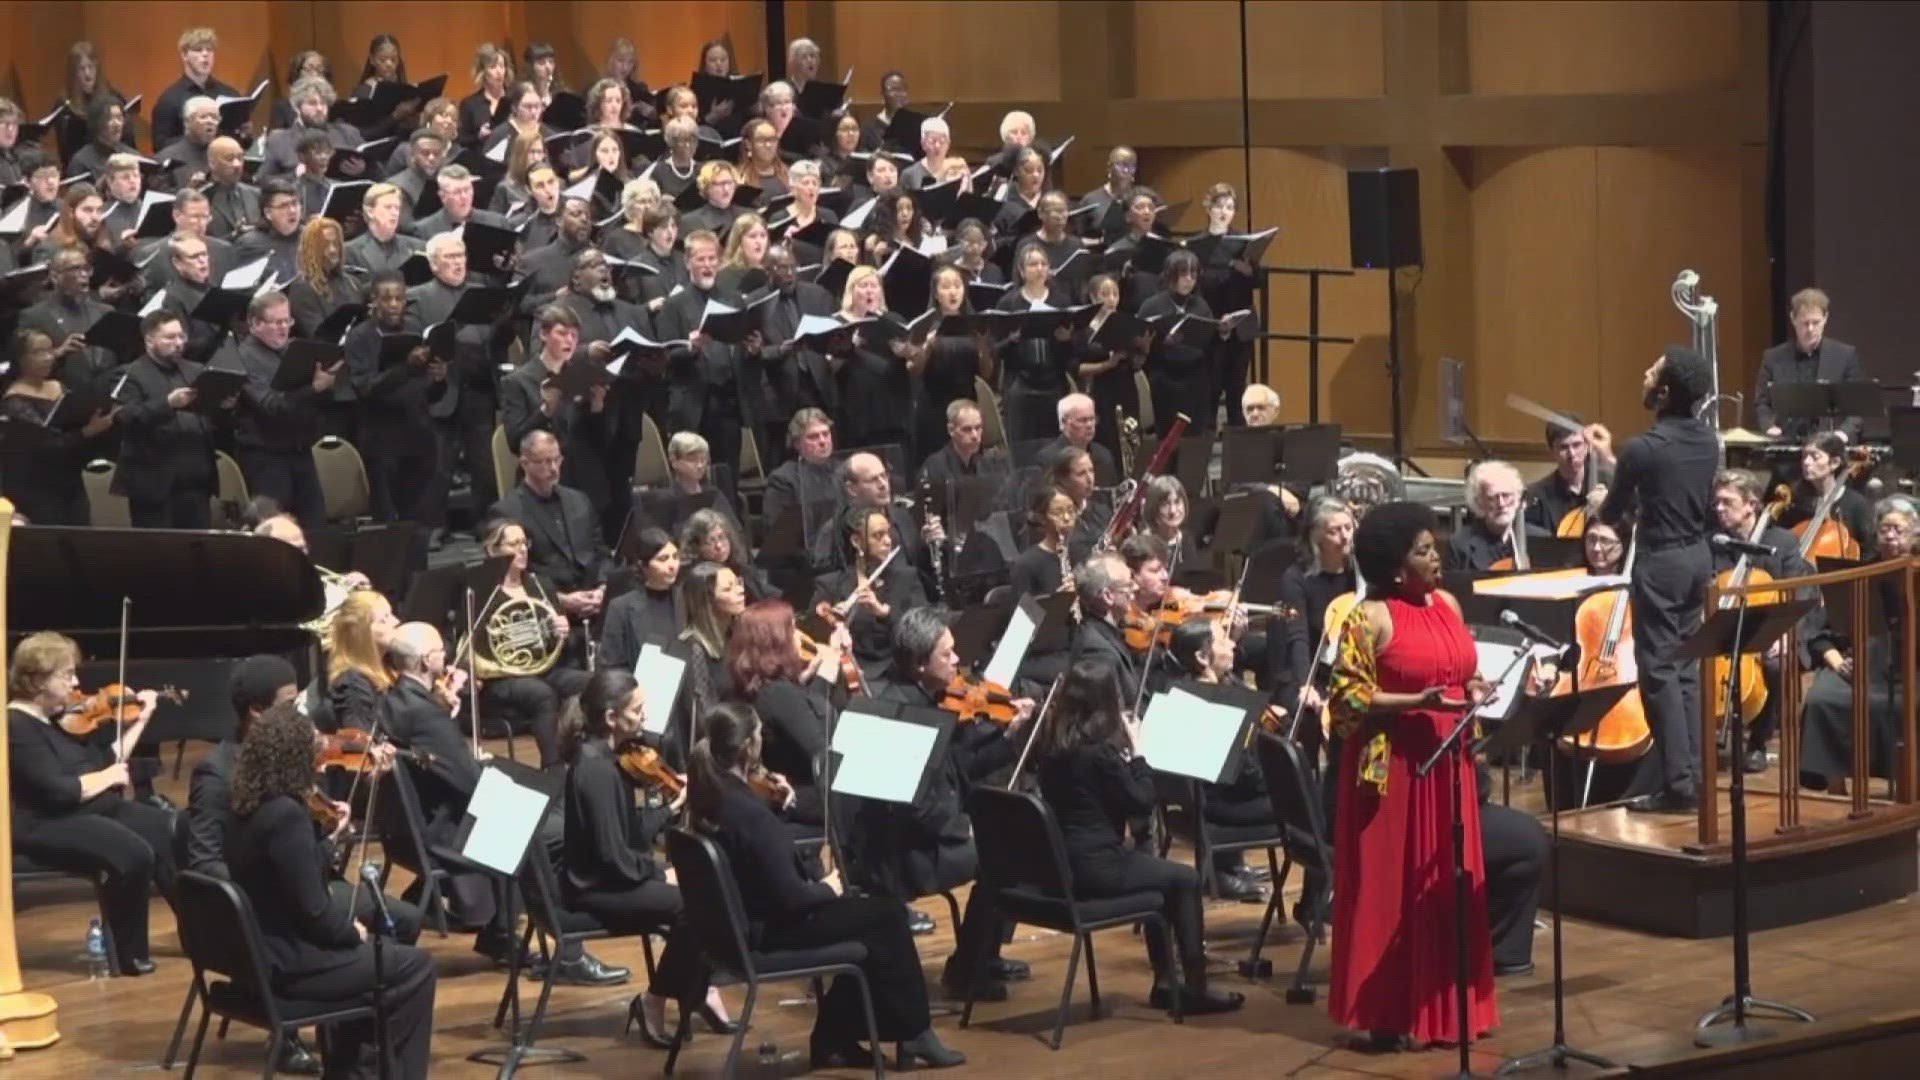 A collaboration between Memphis Symphony Orchestra, the National Civil Rights Museum, the Memphis Symphony Chorus and more honored Harriet Tubman's story of courage.